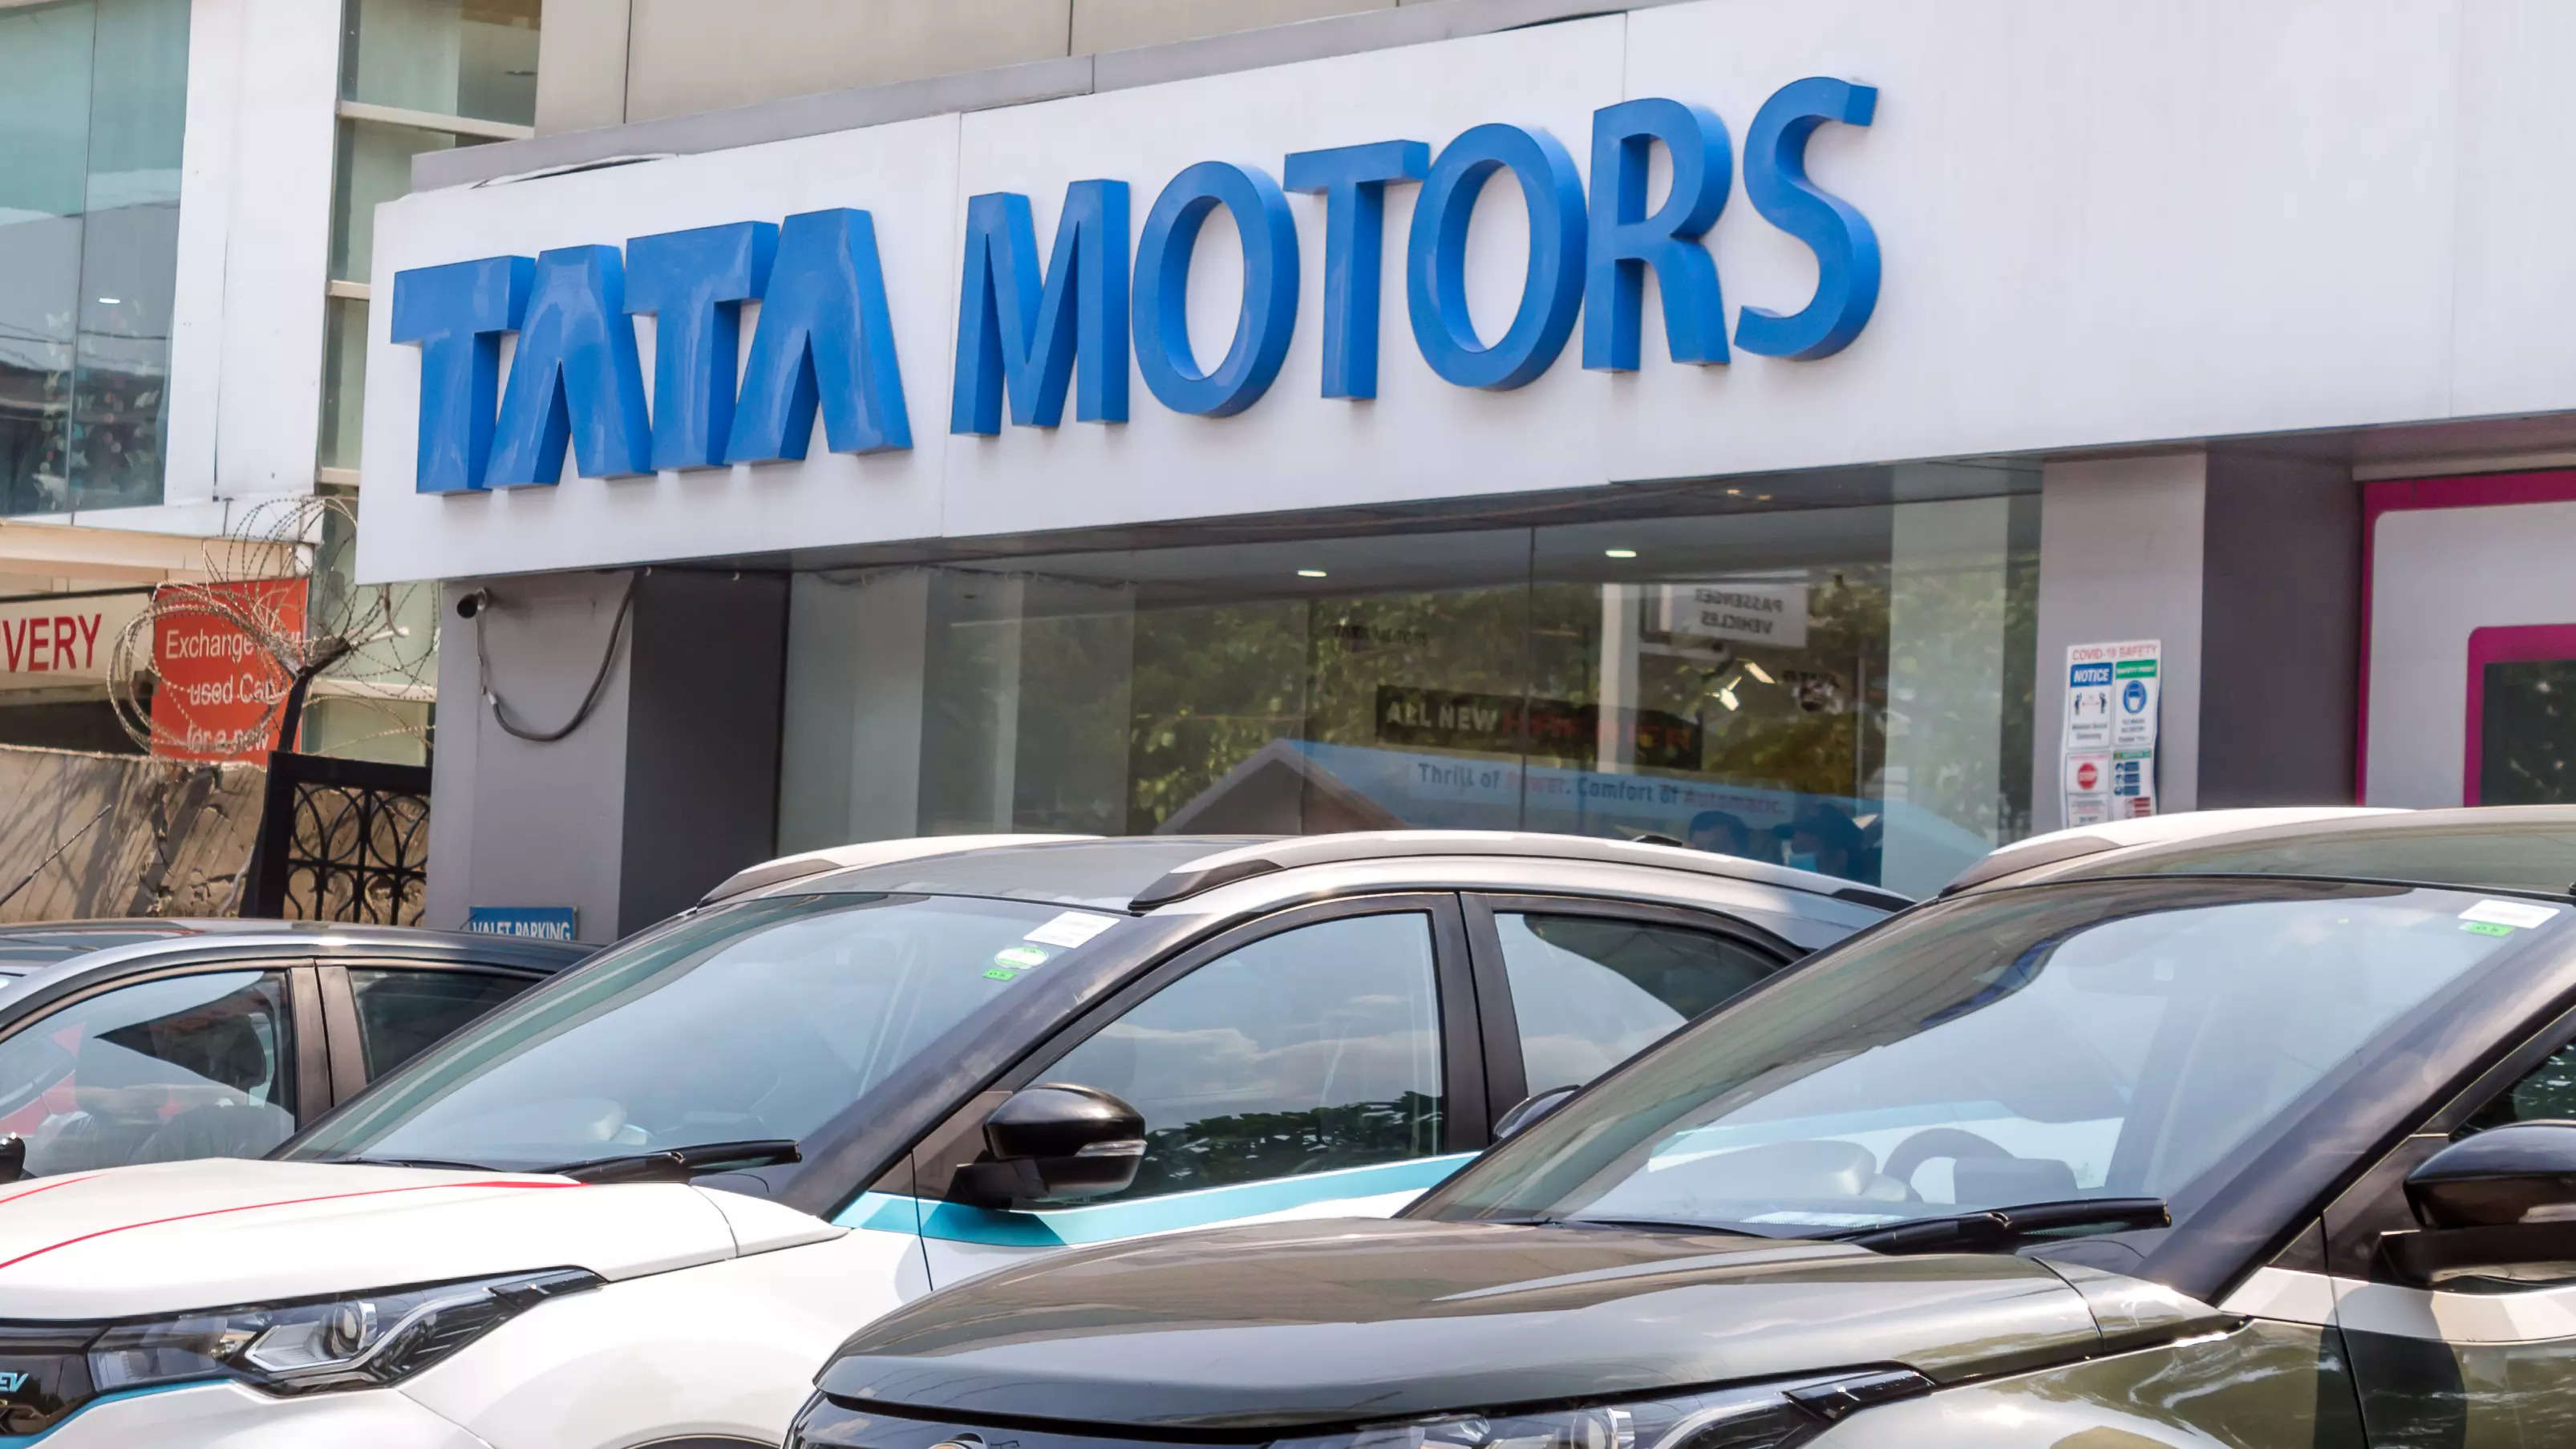 Tata Motors has decidedly taken a lead in the EV market given Tesla’s teething issues and Maruti Suzuki’s reluctance to go whole hog. 